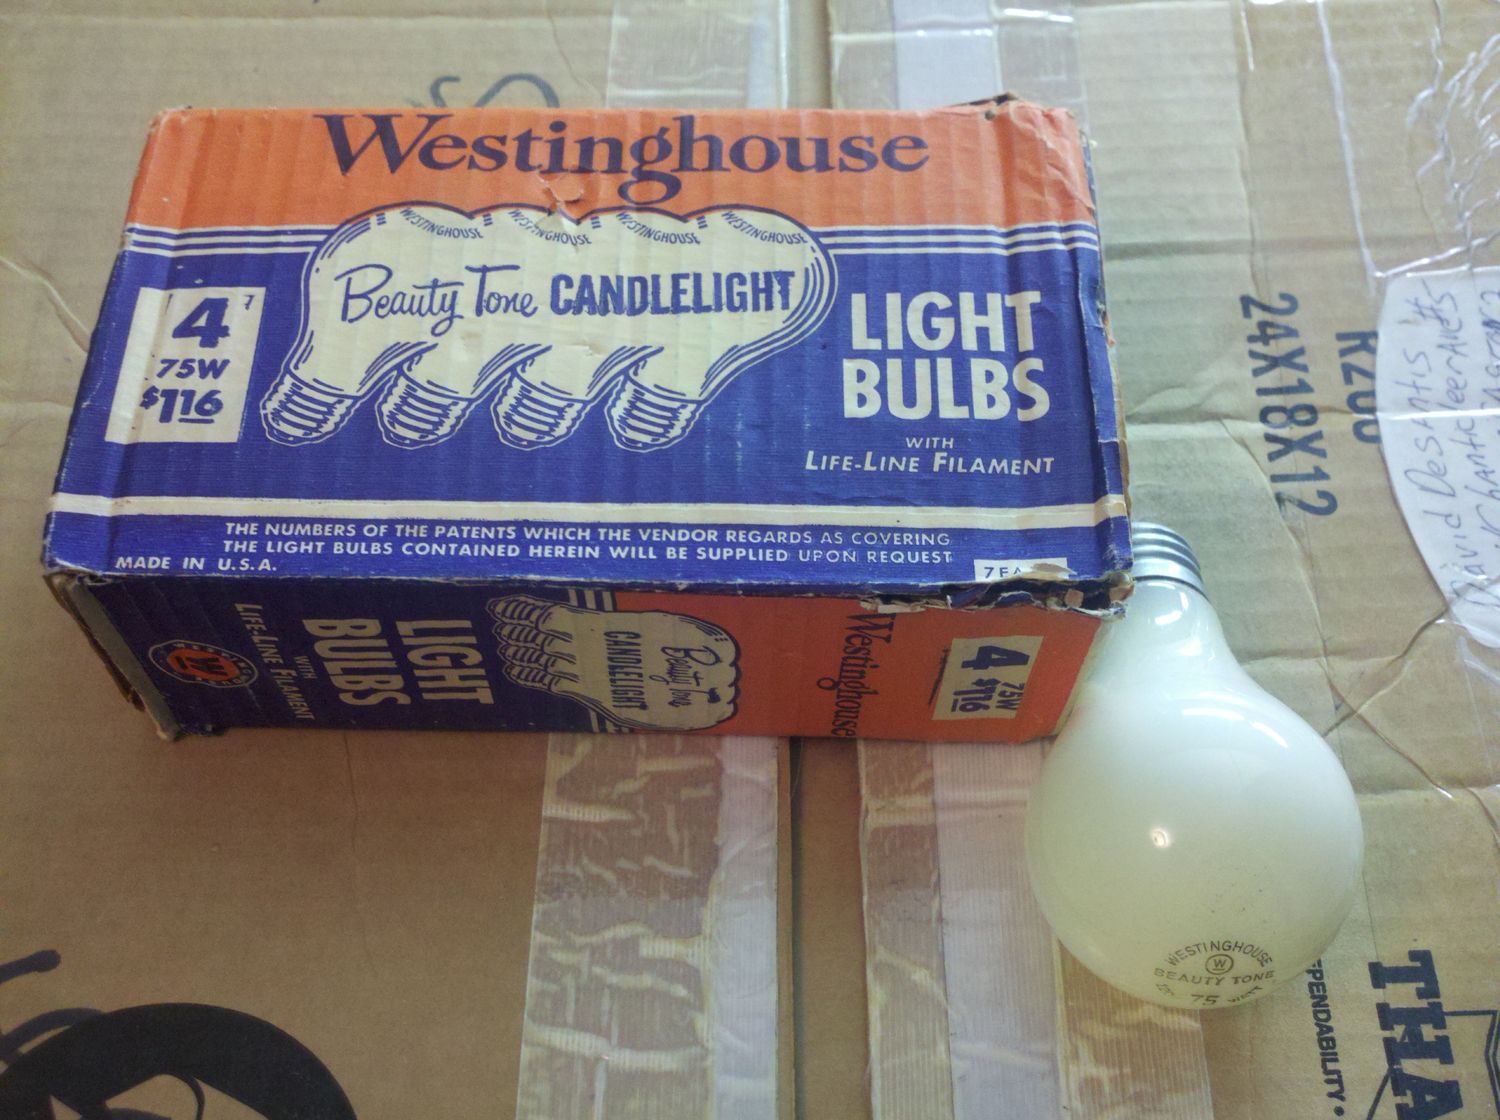 Westinghouse 75w Beauty-Tone Candlelight bulbs
Candlelight is one of the colors in the Westy Beauty-Lite line, the others are aqua and pink. Only the pink was made after the 50s.
Keywords: Lamps